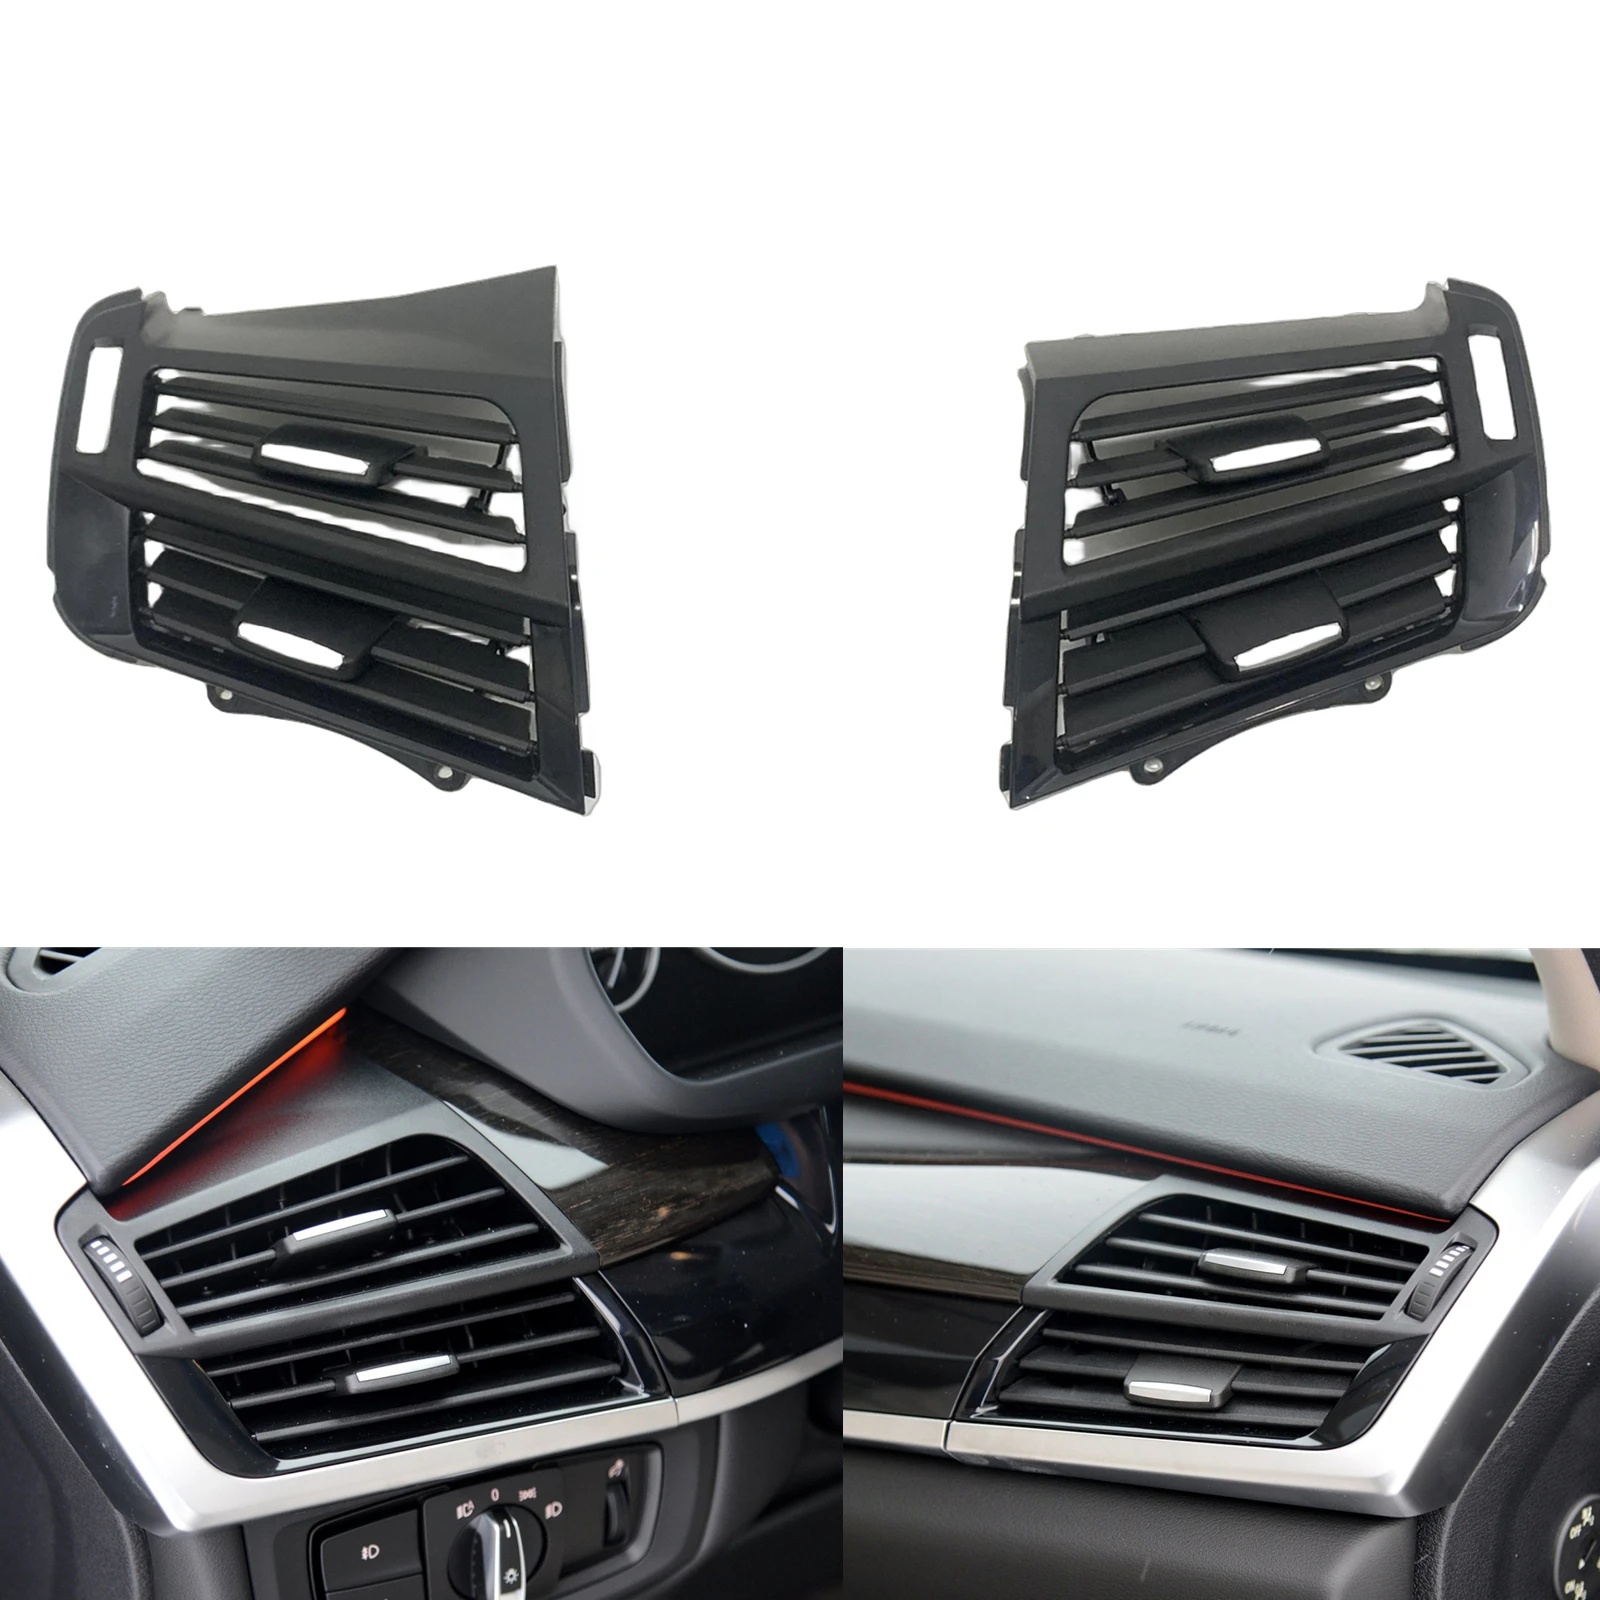 

Front A/C Air Vent Outlet Grill Cover Dashboard Conditioning Panel Frame Grille For BMW X5 F15 X6 F16 X5M F85 X6M F86 2014-2018